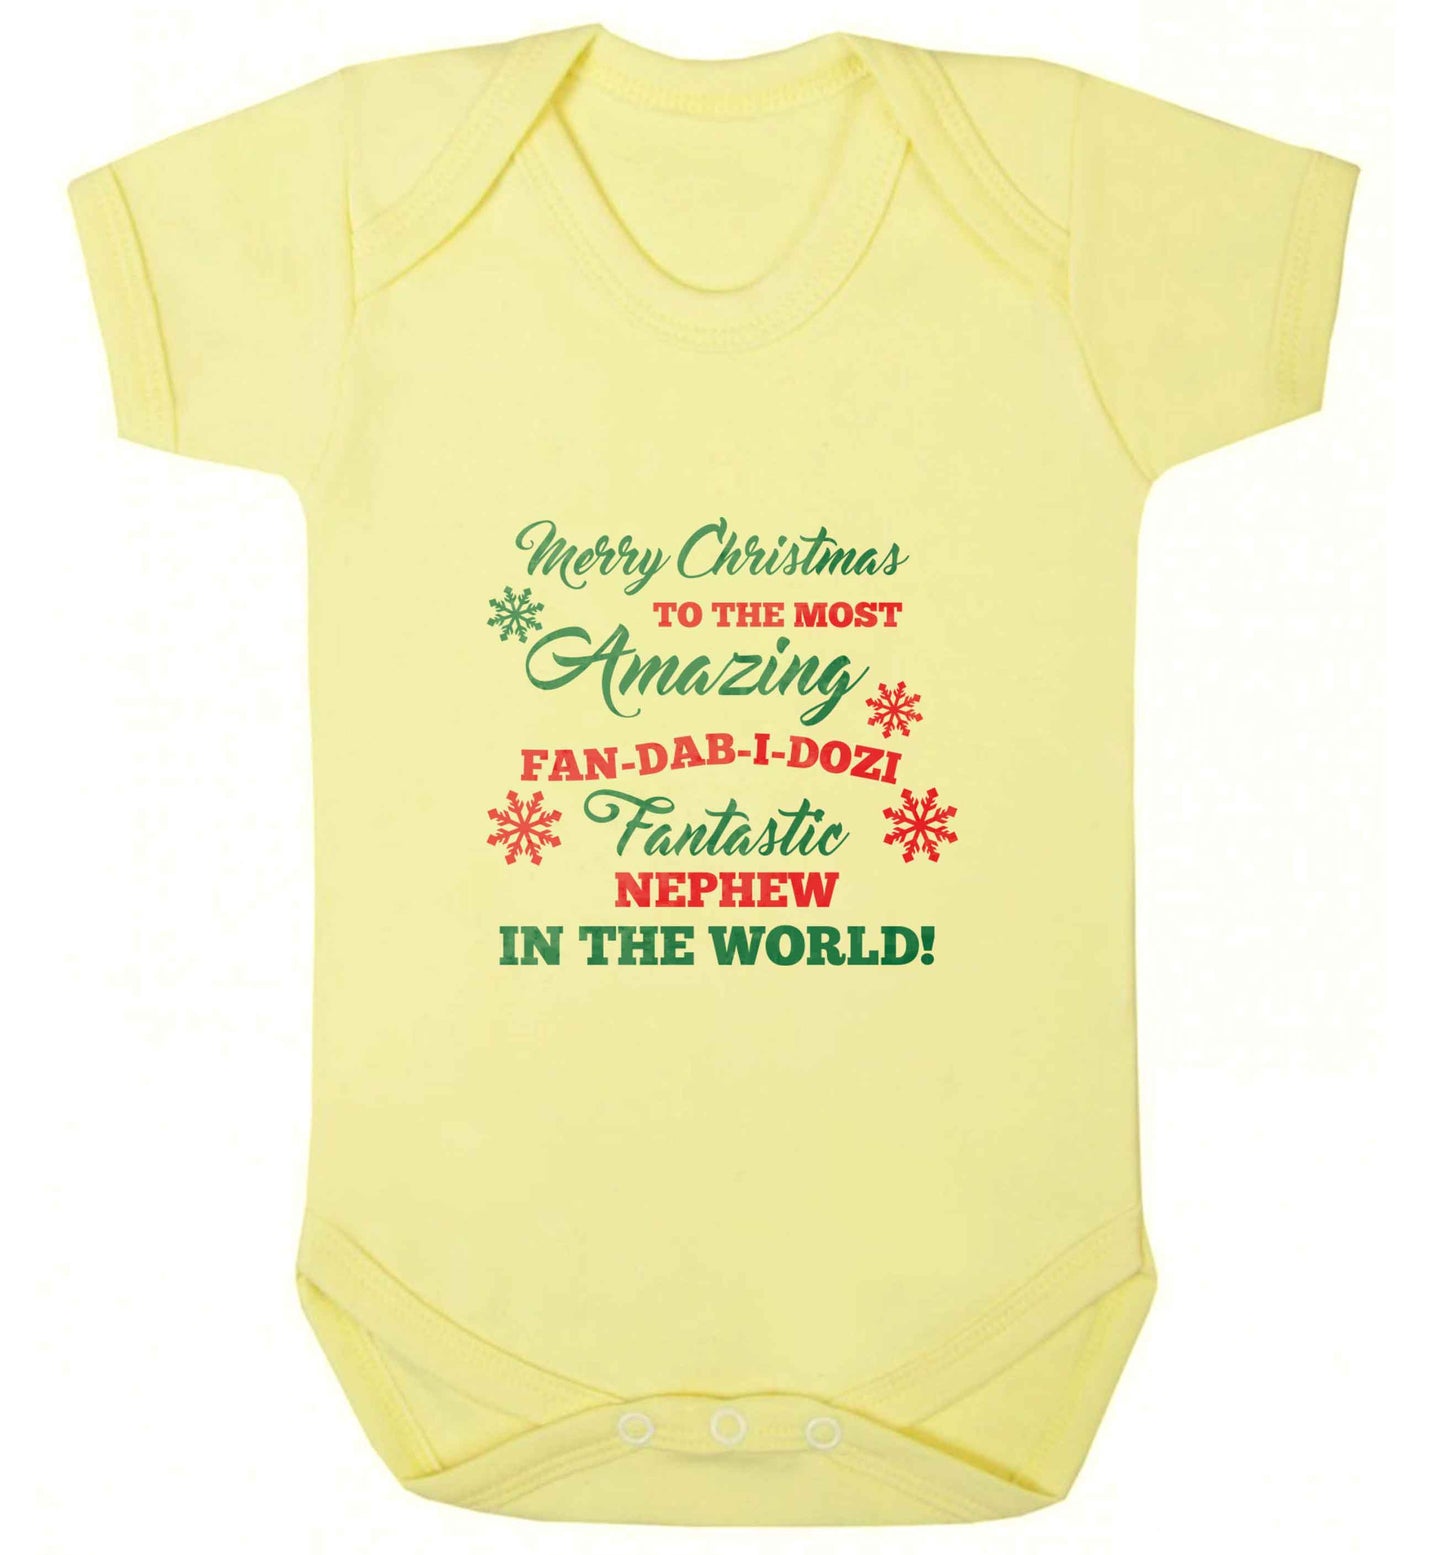 Merry Christmas to the most amazing fan-dab-i-dozi fantasic Nephew in the world baby vest pale yellow 18-24 months